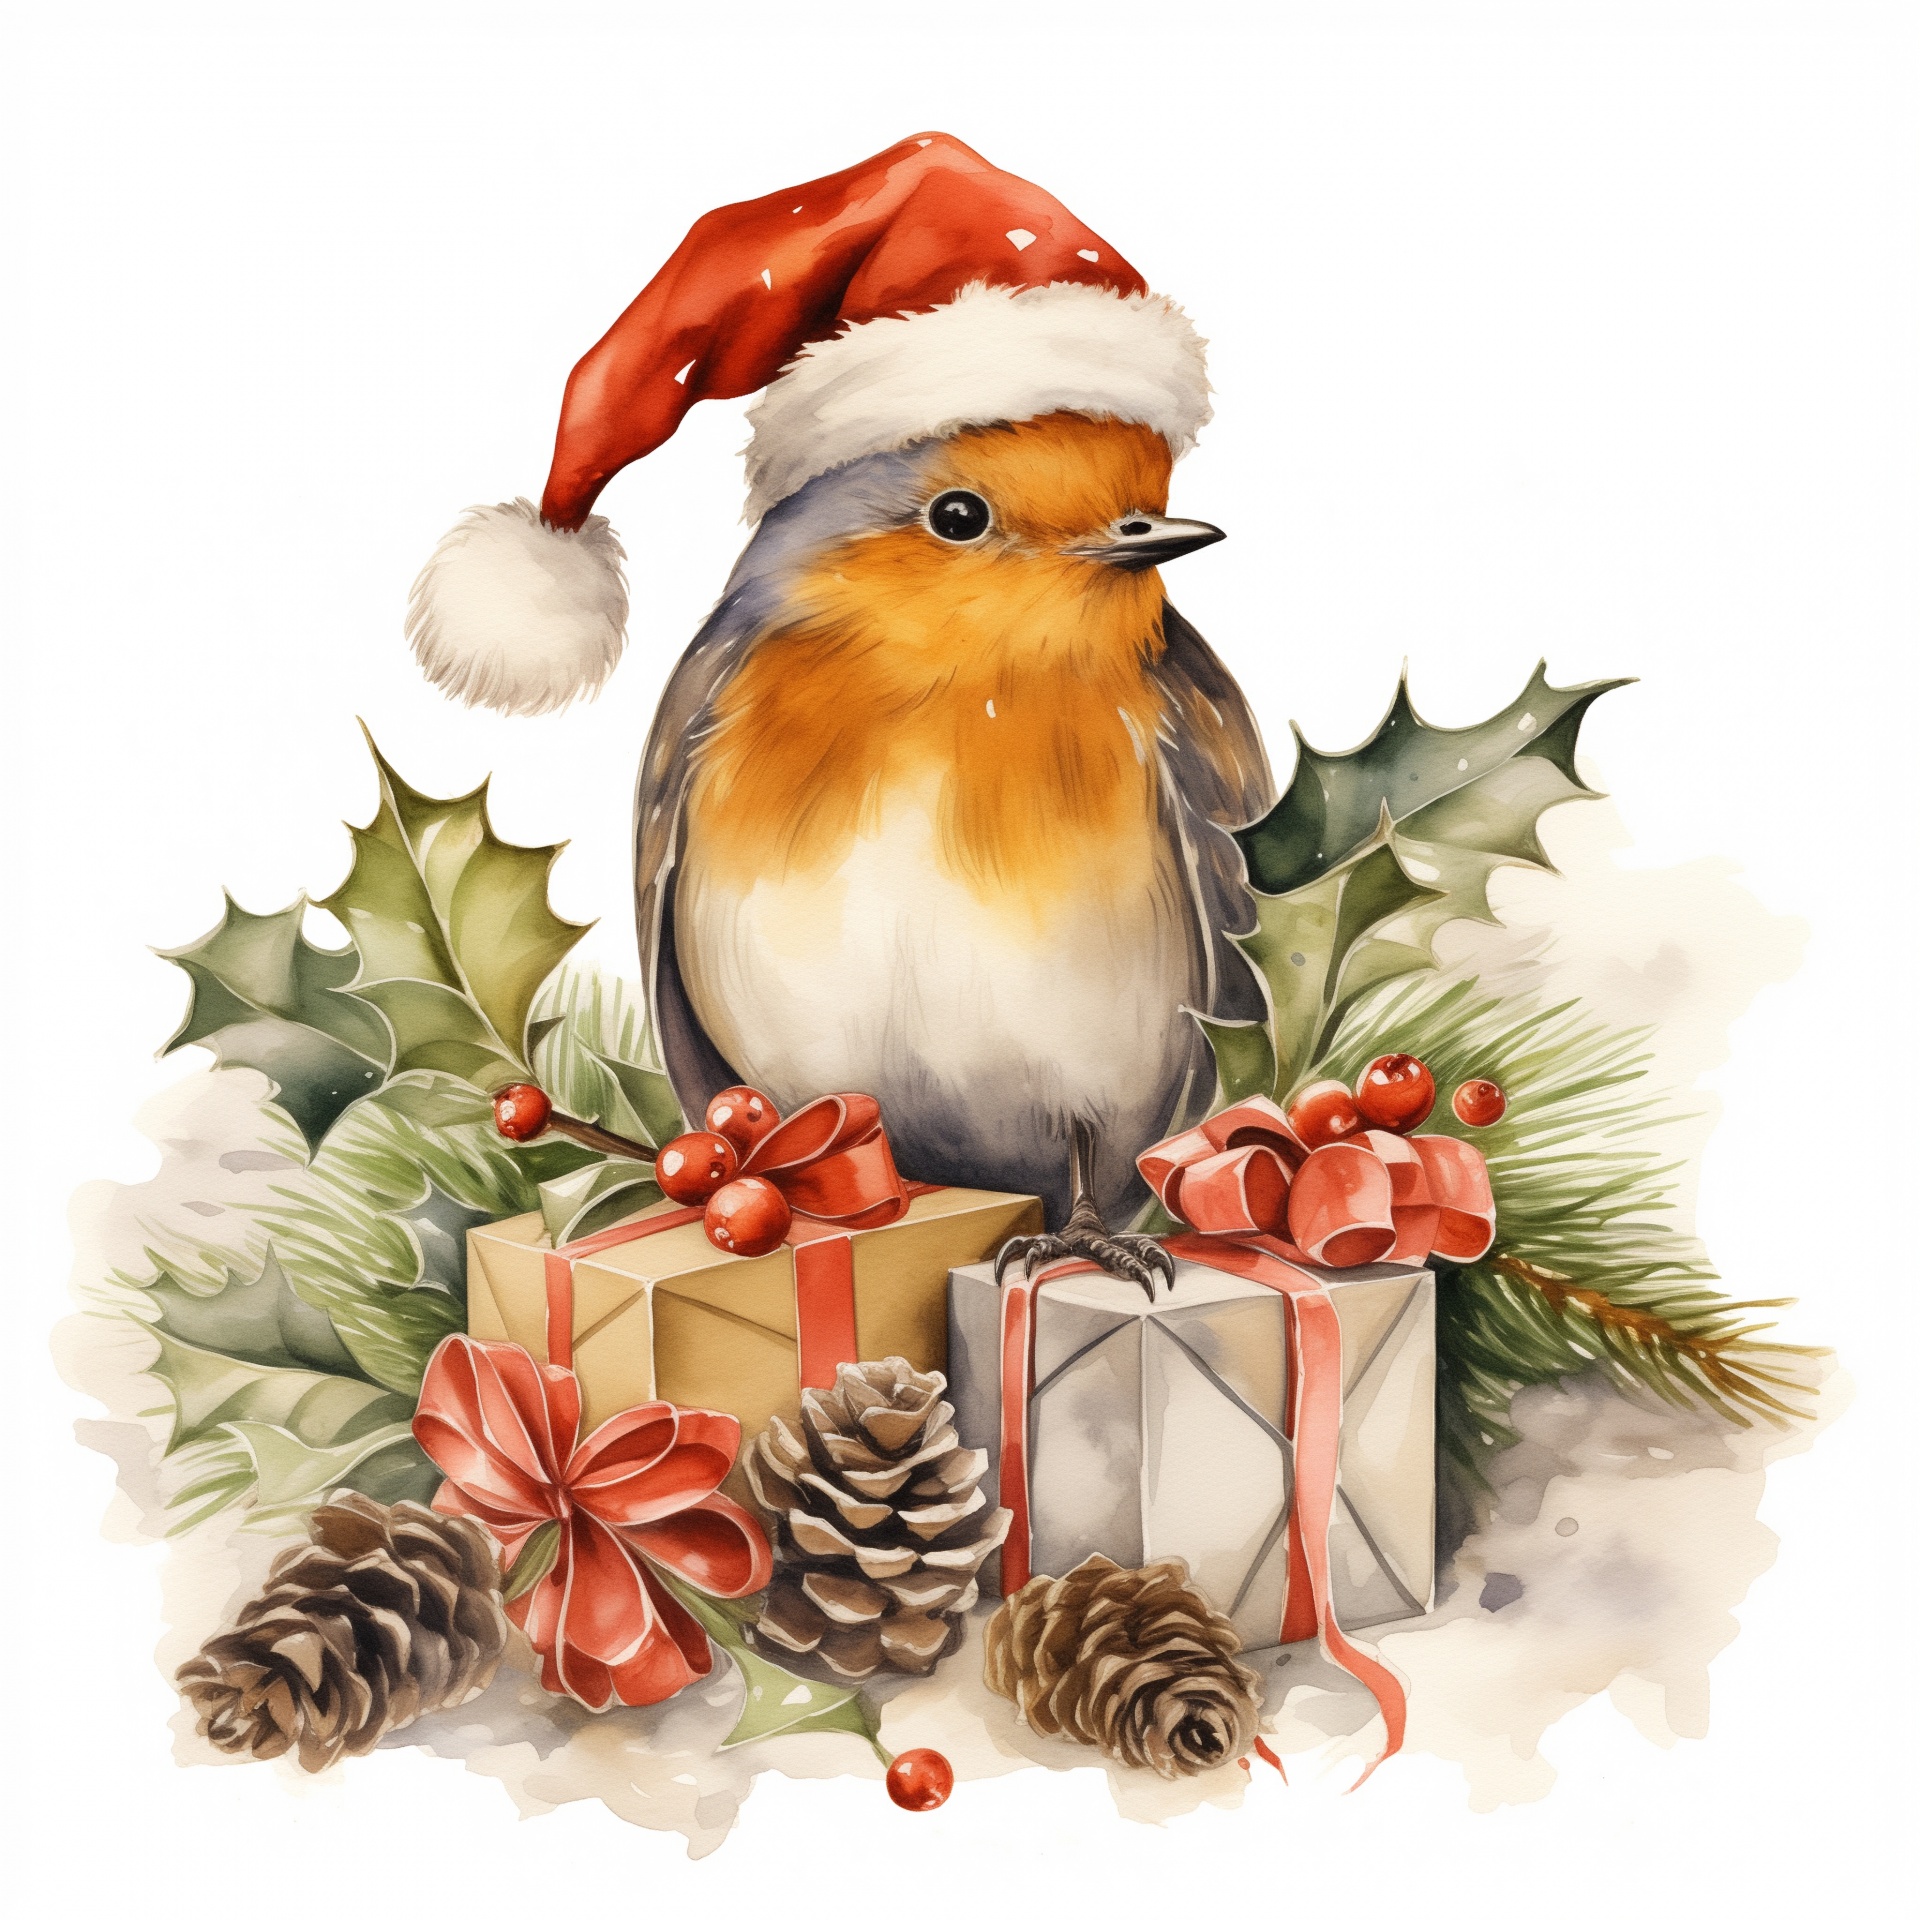 Robin Bird At Christmas Free Stock Photo - Public Domain Pictures